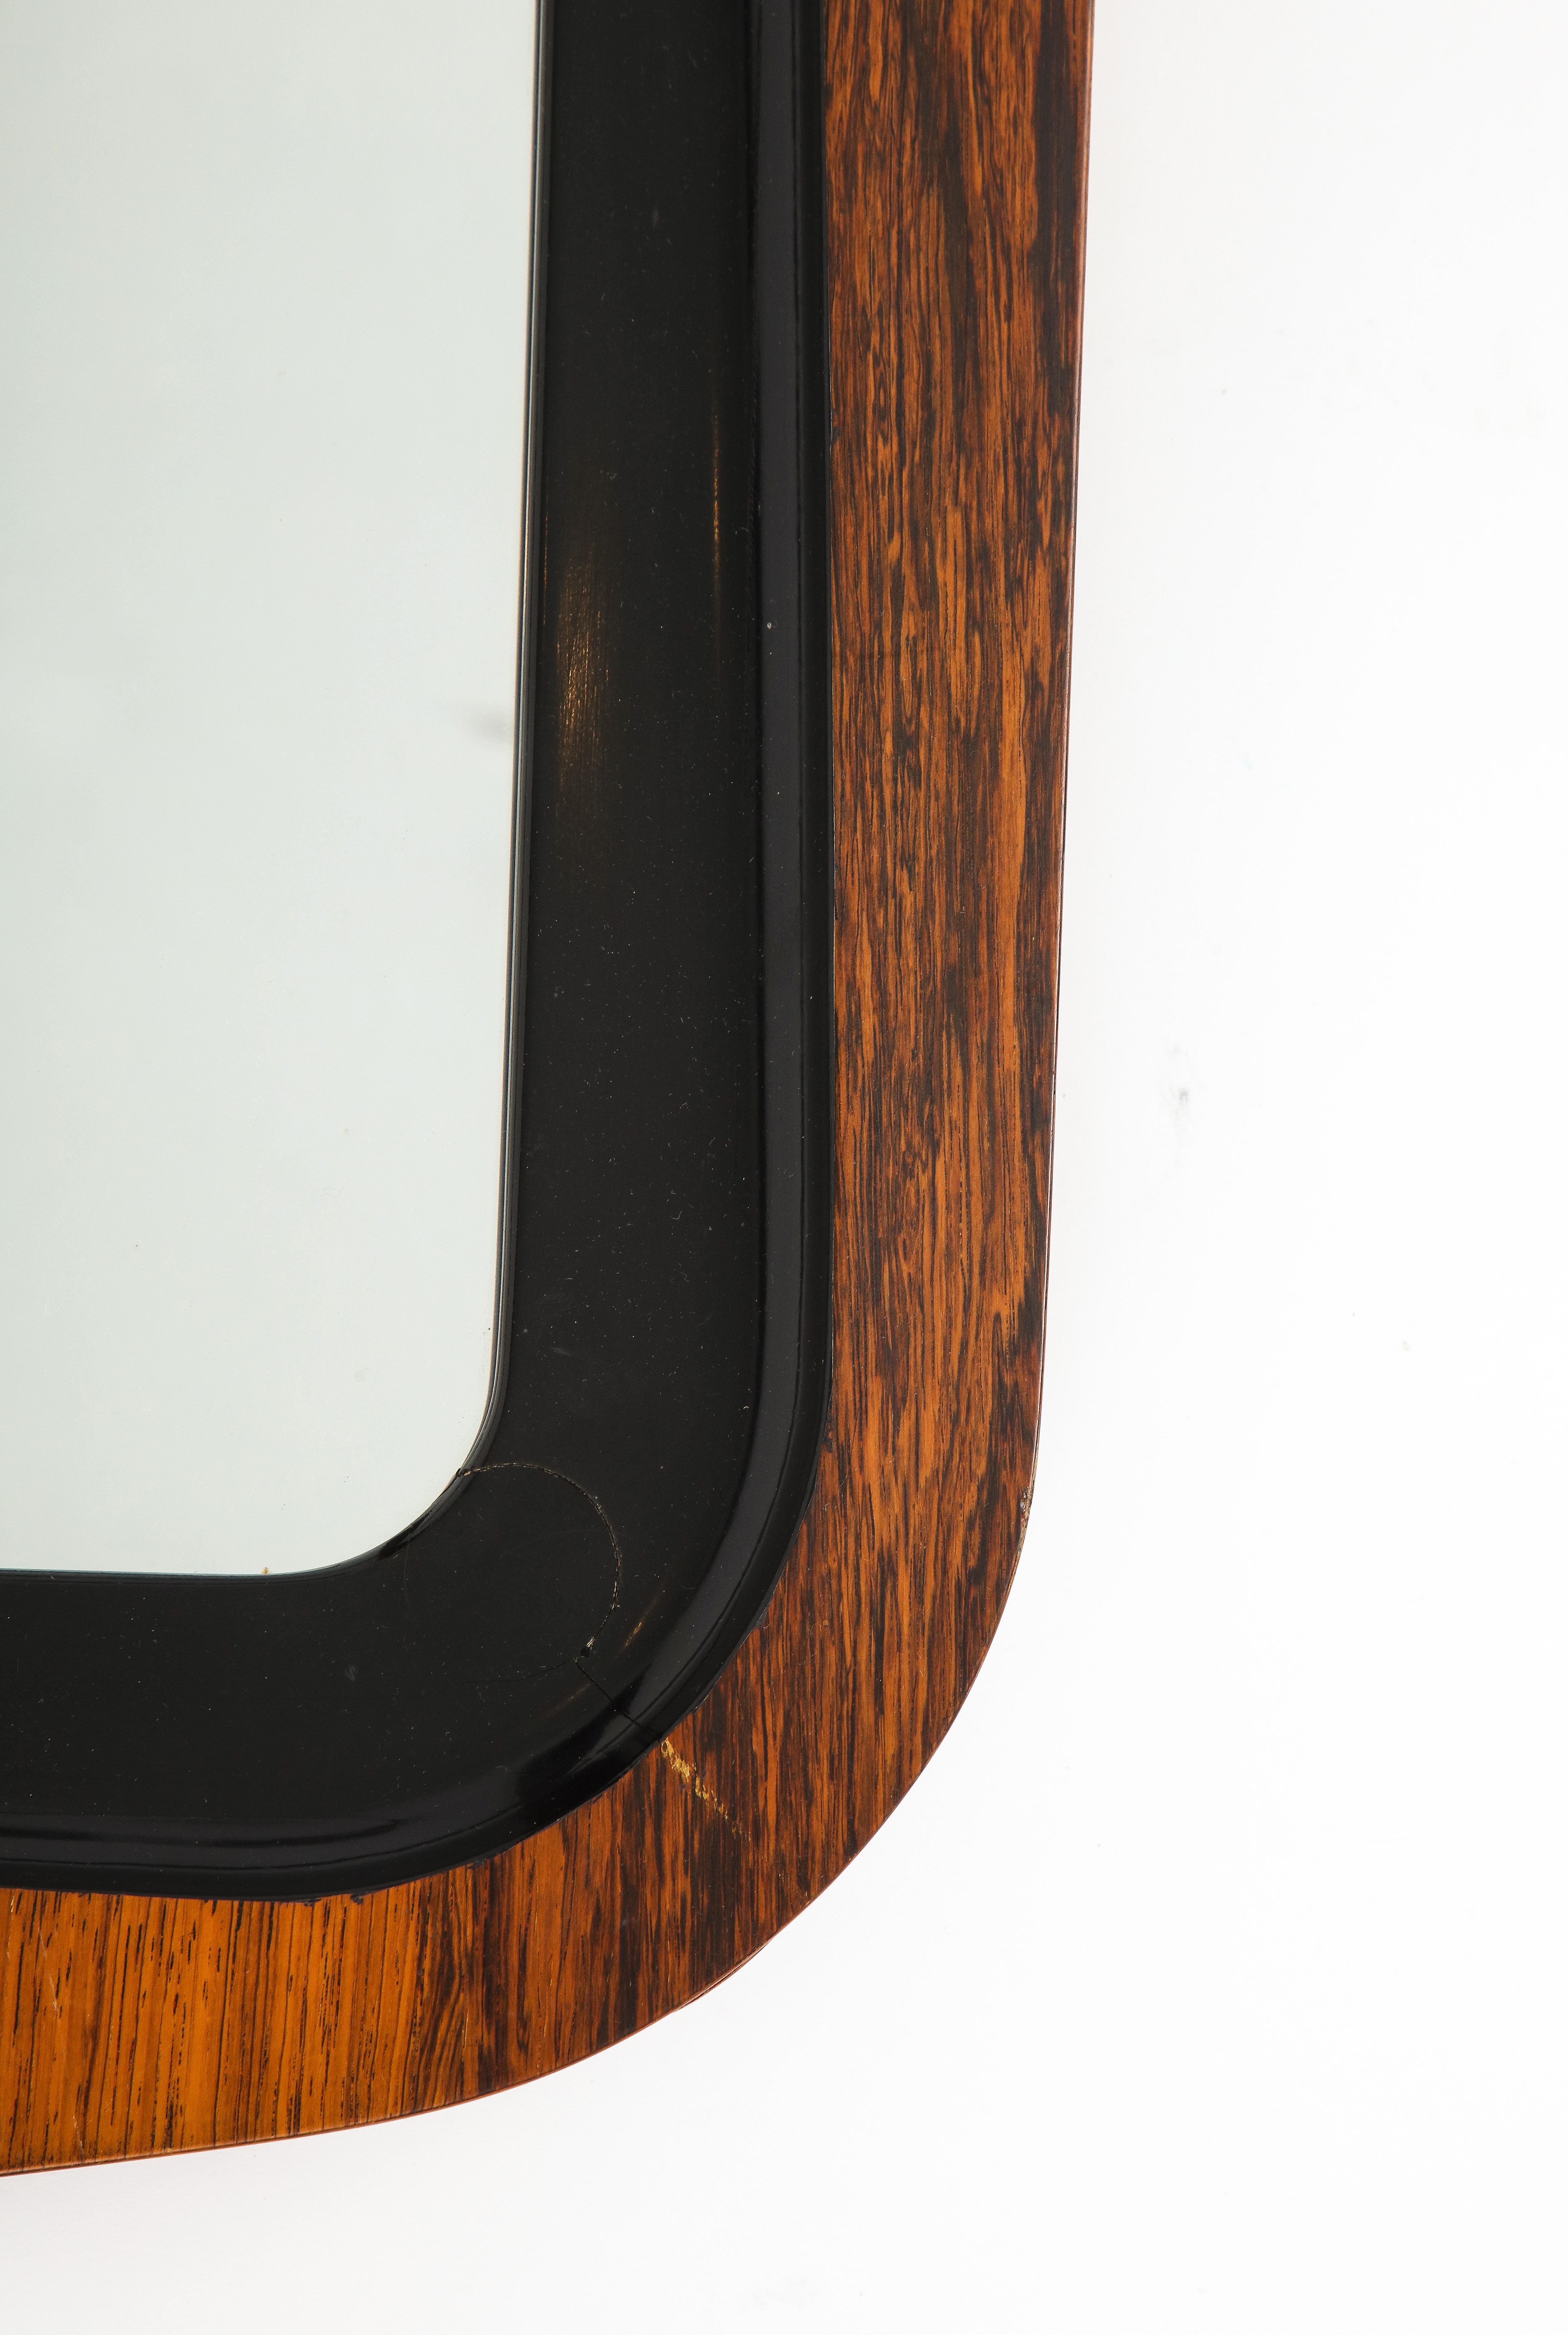 Swedish Glas & Trä Wall Mirror Rosewood & Painted Wood Hovmantorp, Sweden 1950's For Sale